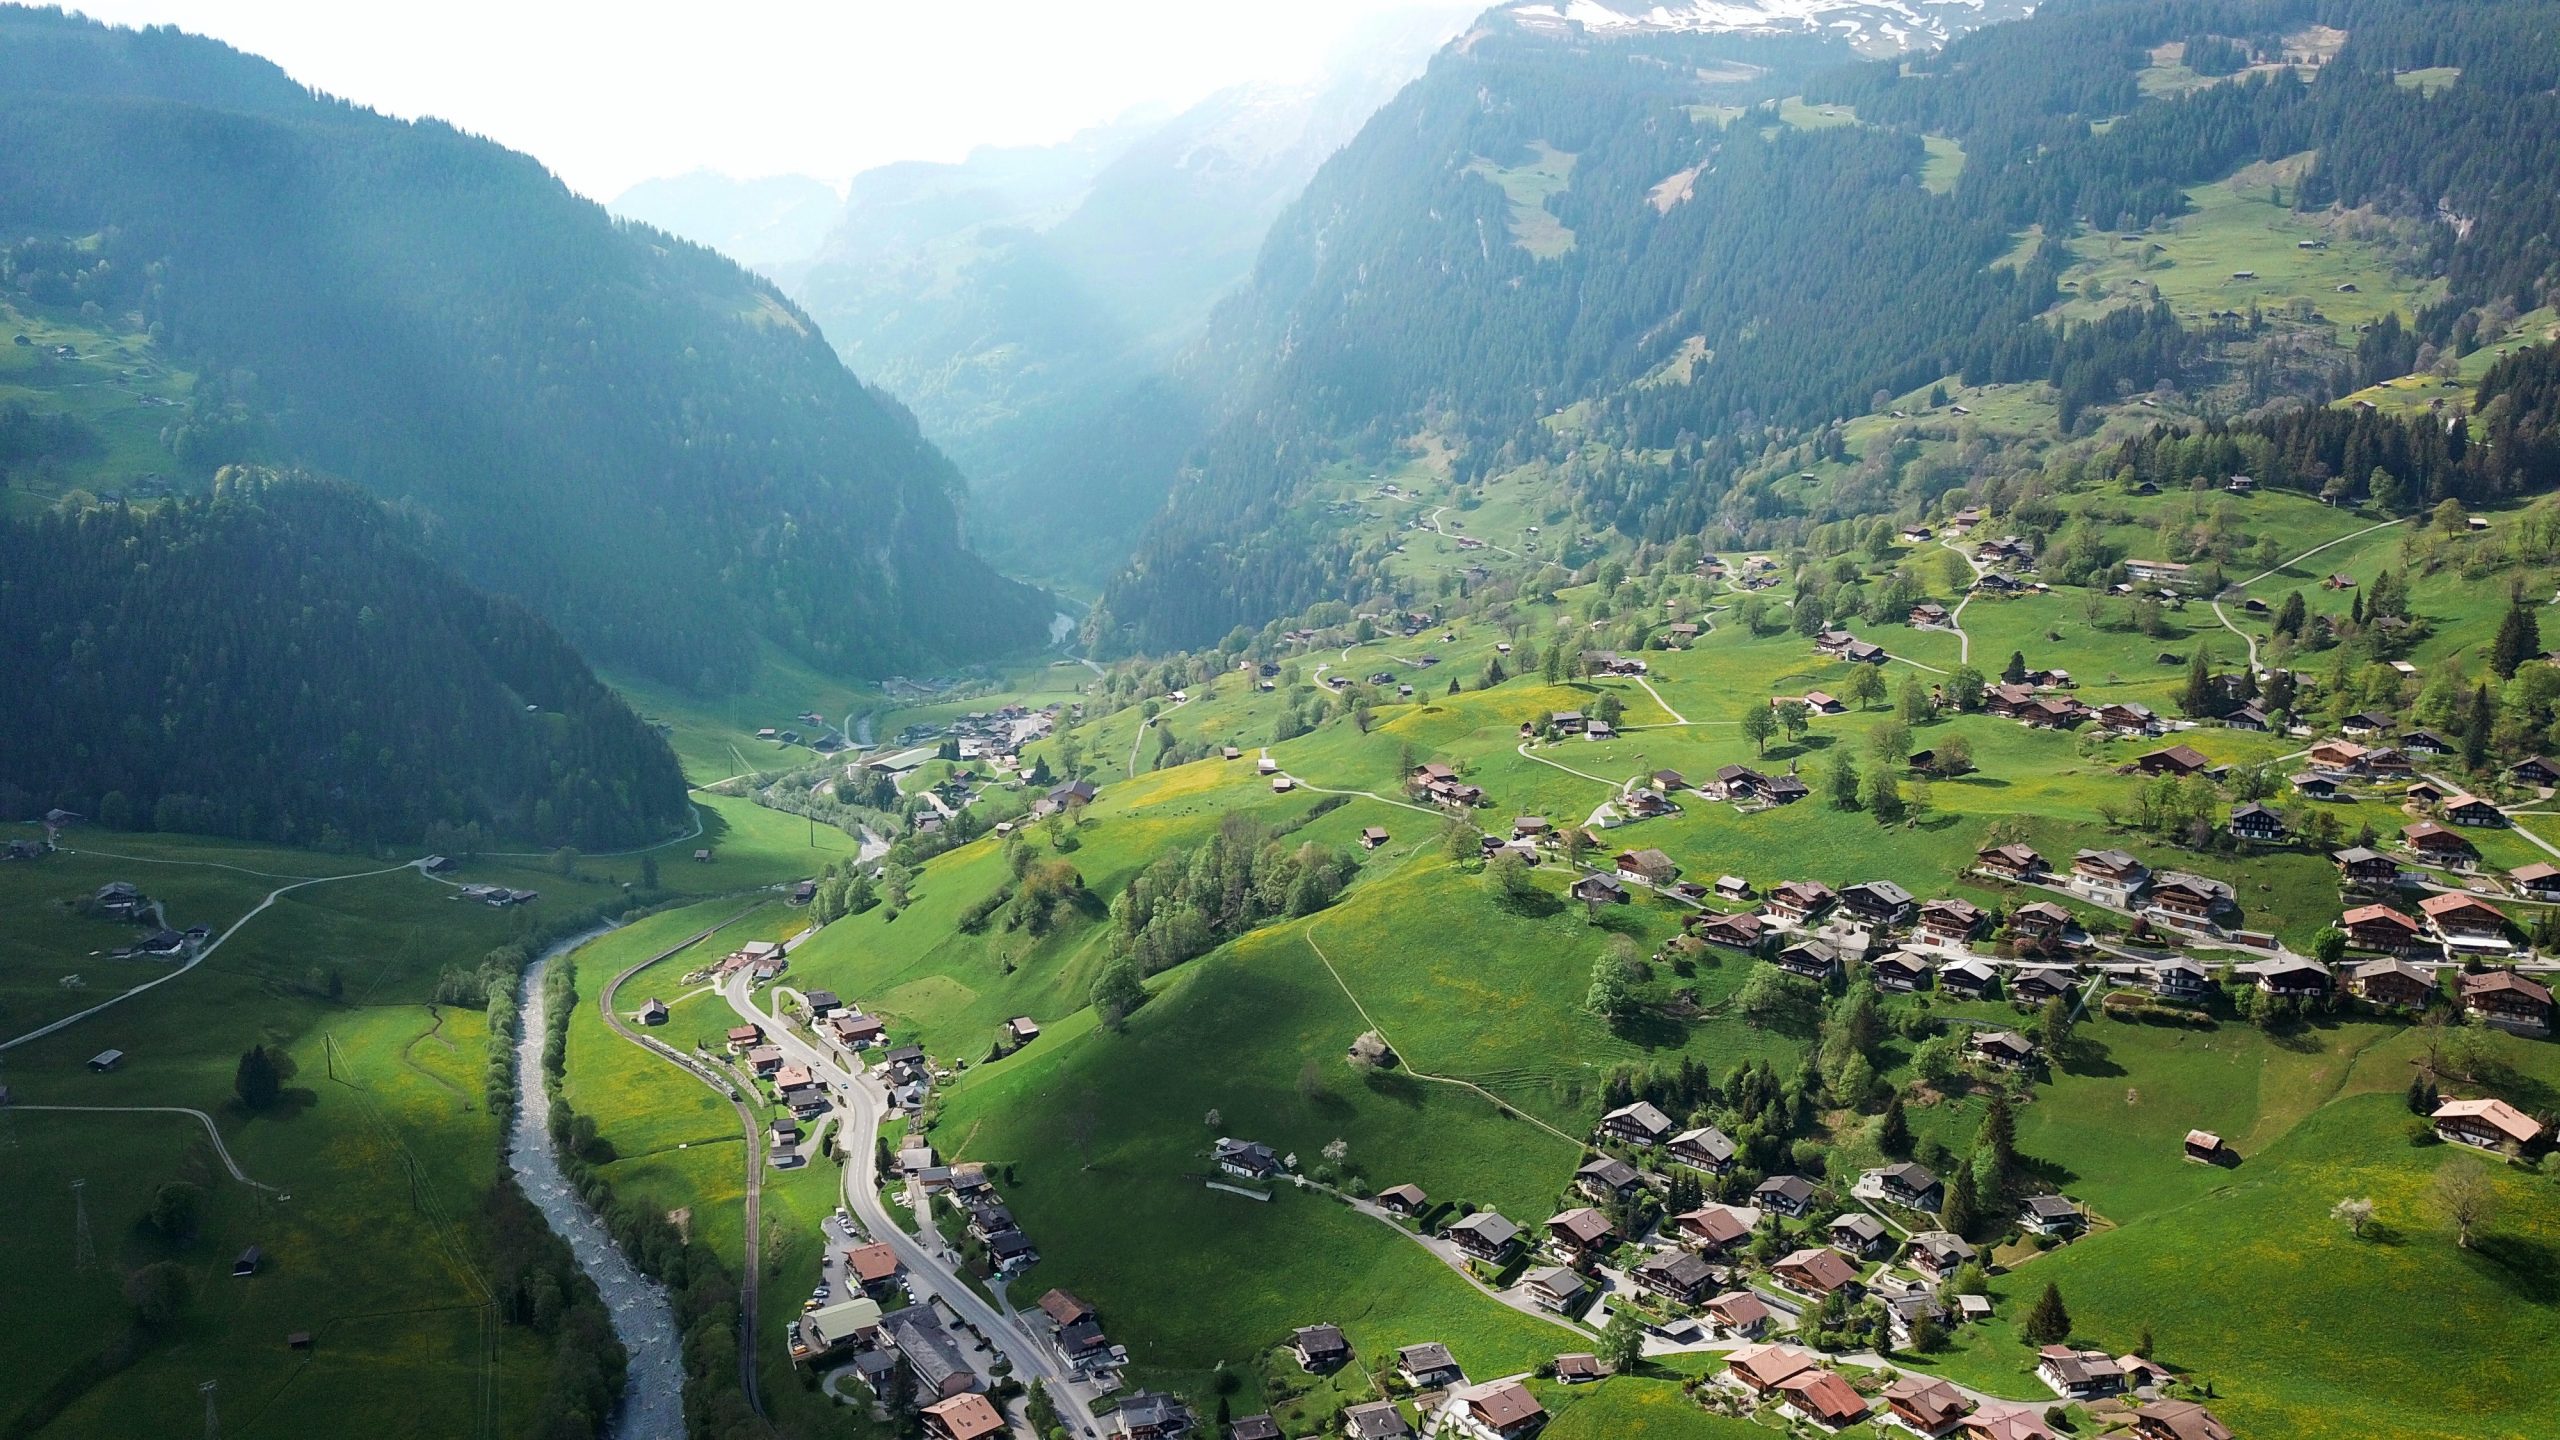 Top 7 Things to Do in Grindelwald: The Best of Switzerland